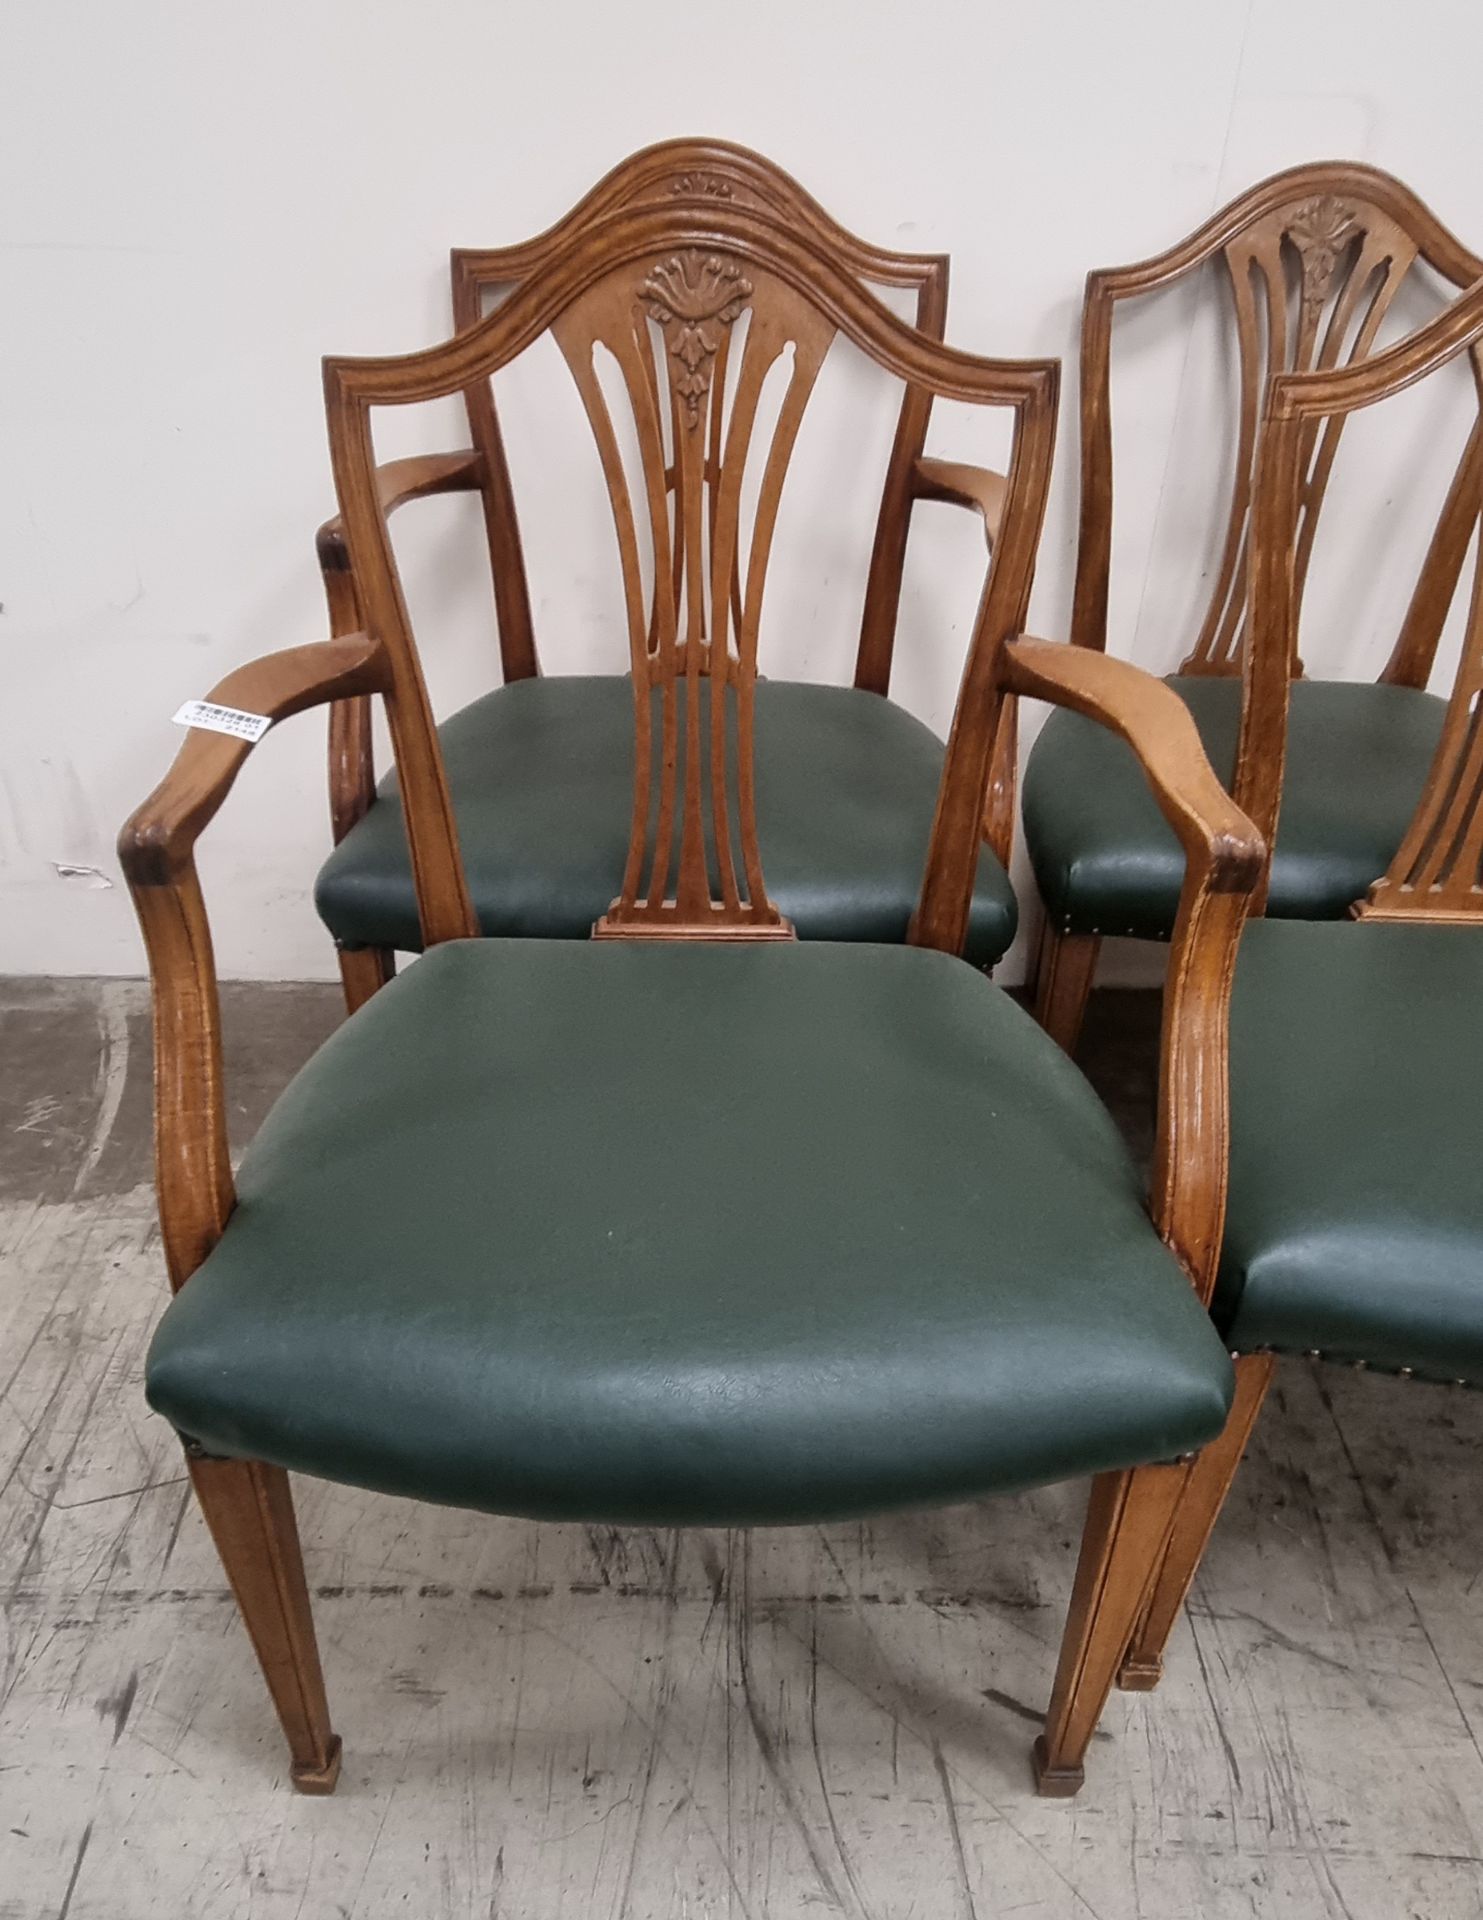 8x 1970 -1980's Wooden chairs - Image 3 of 4